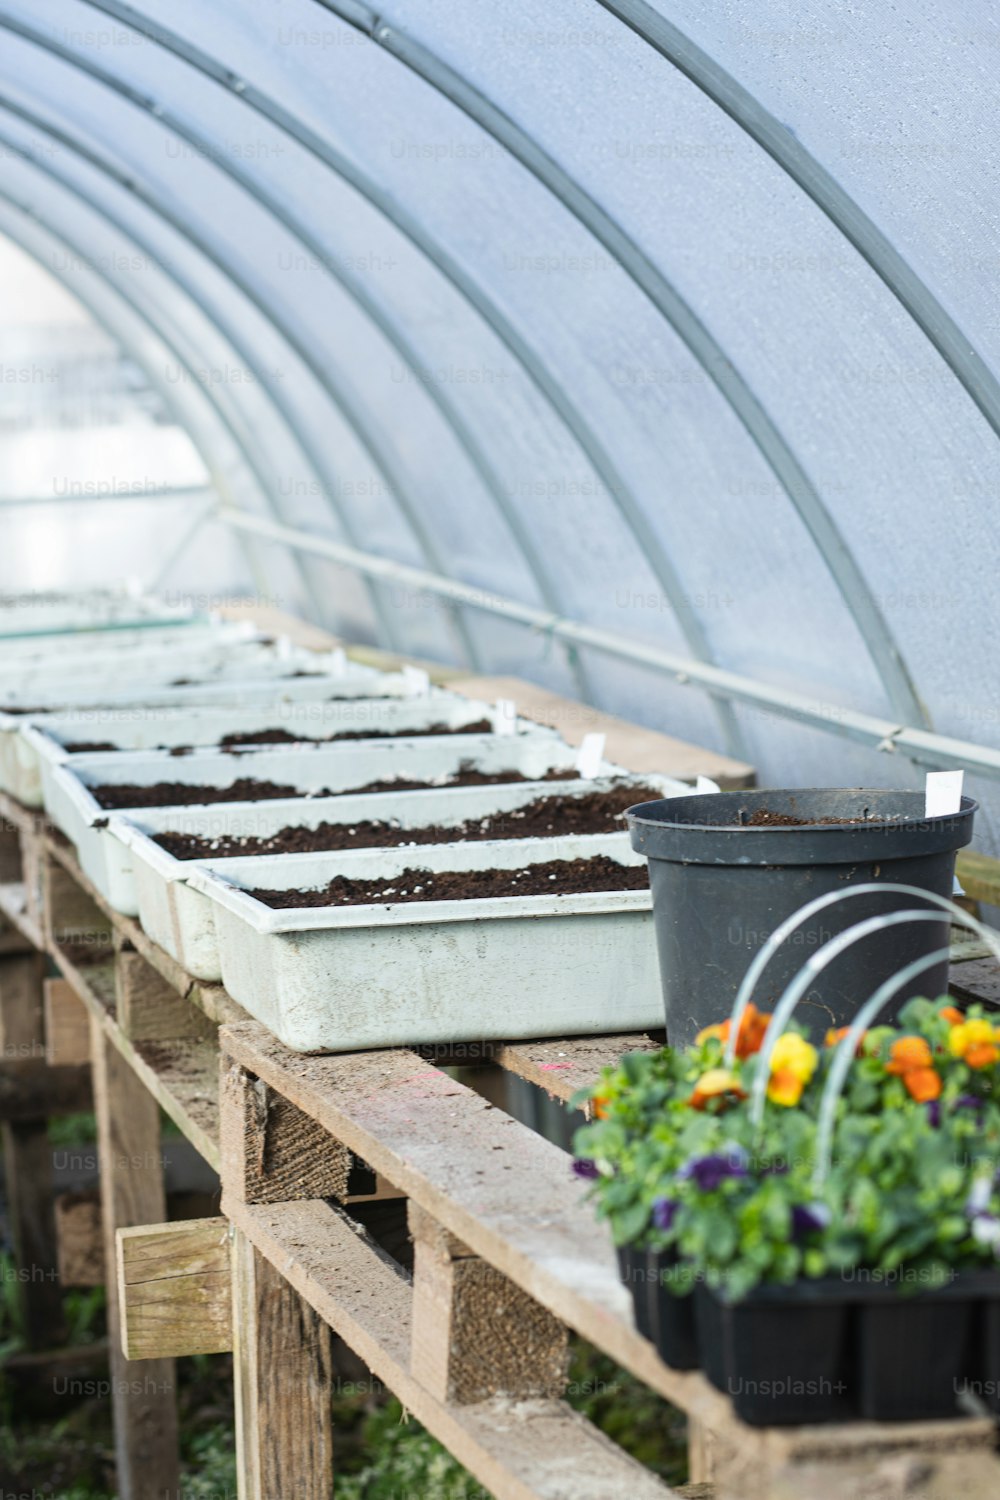 a row of greenhouses filled with potted plants